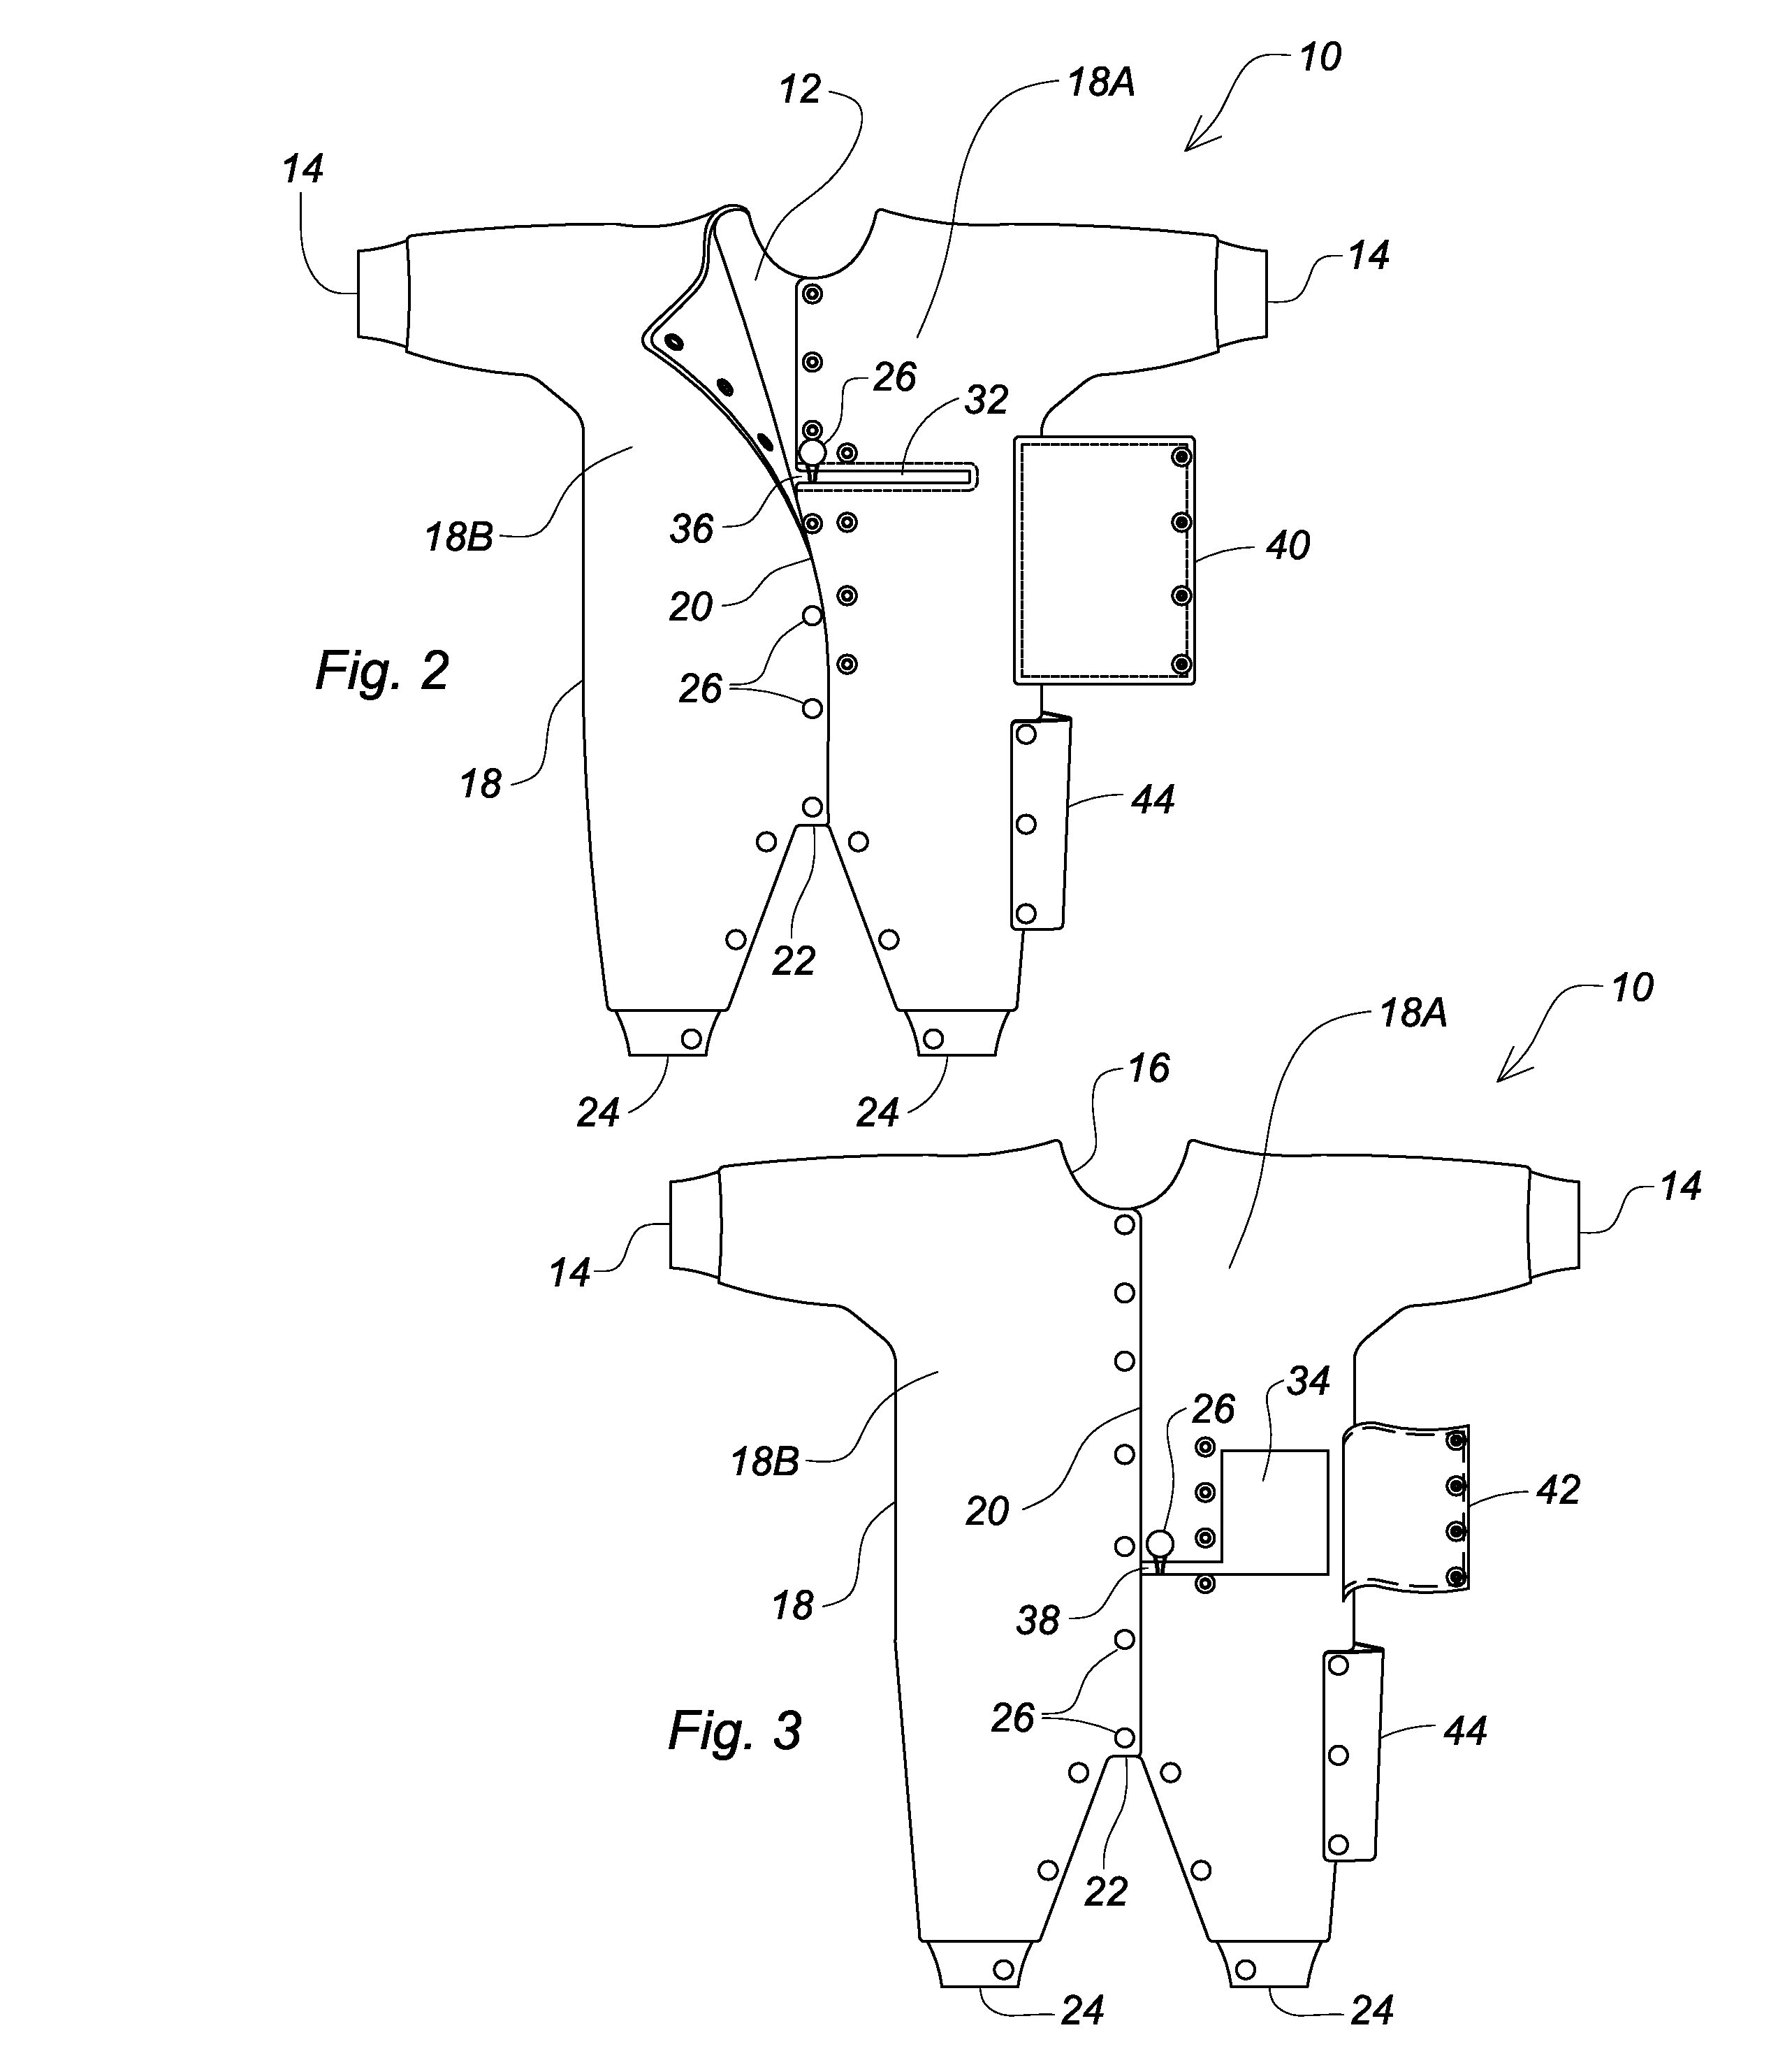 Garment for accommodating intravenous catheters and gastronomy tube